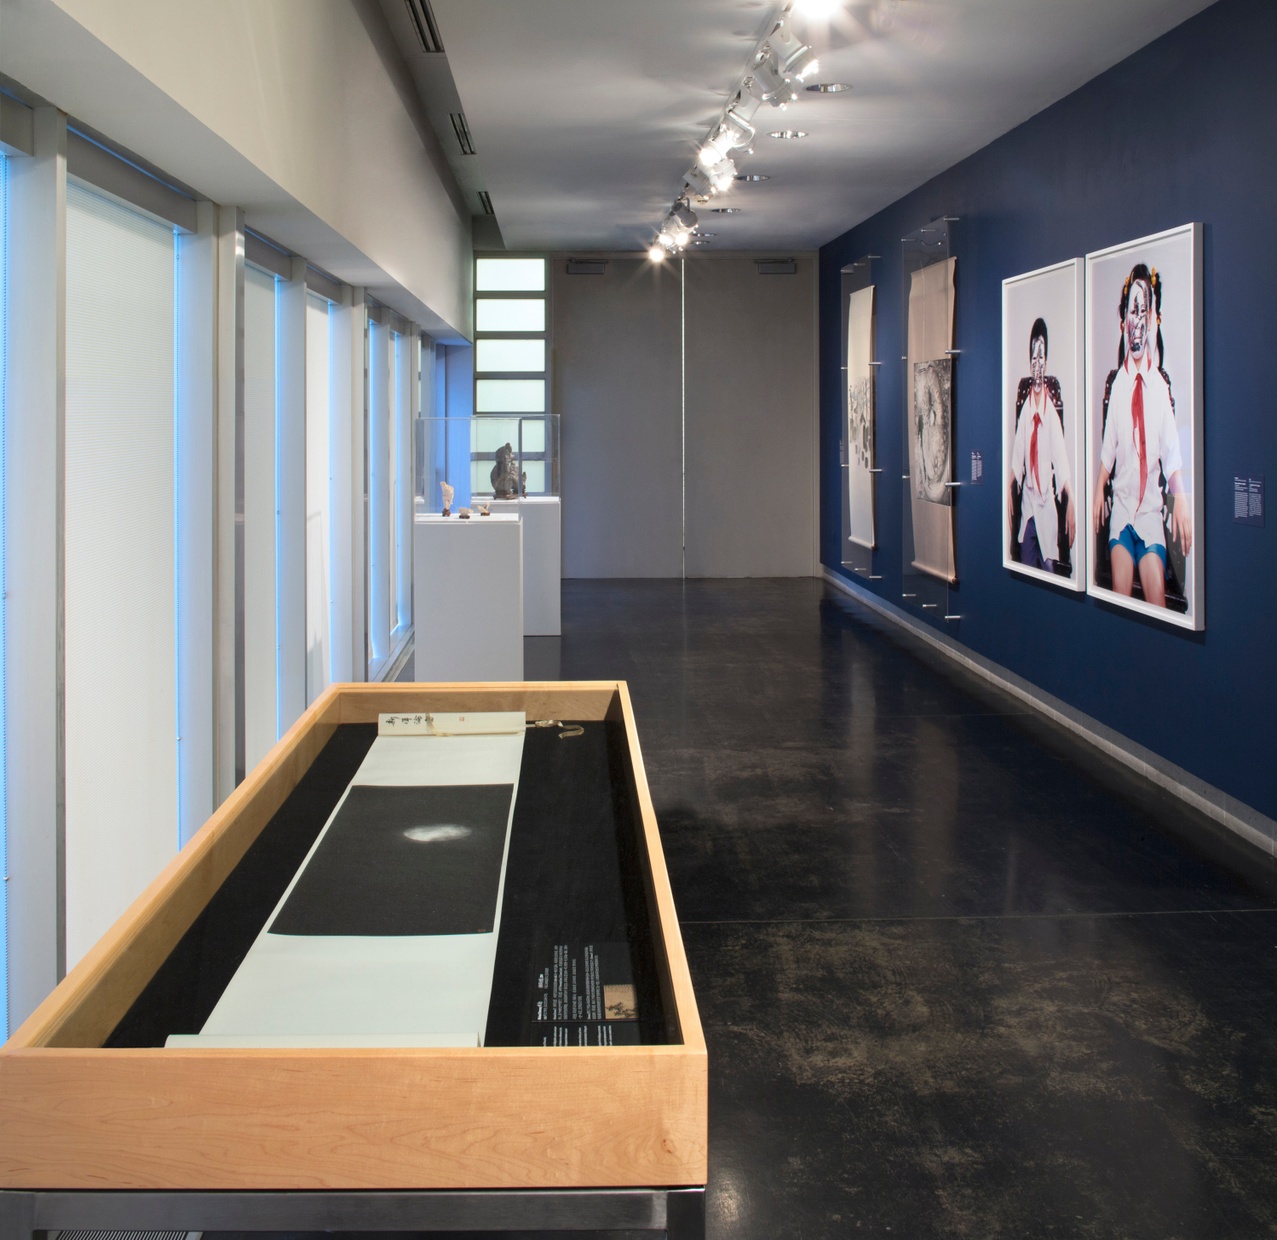 A long, narrow gallery with a case in the left forefront and pedestals behind. Scrolls and framed work hang on a wall painted dark blue on the right.